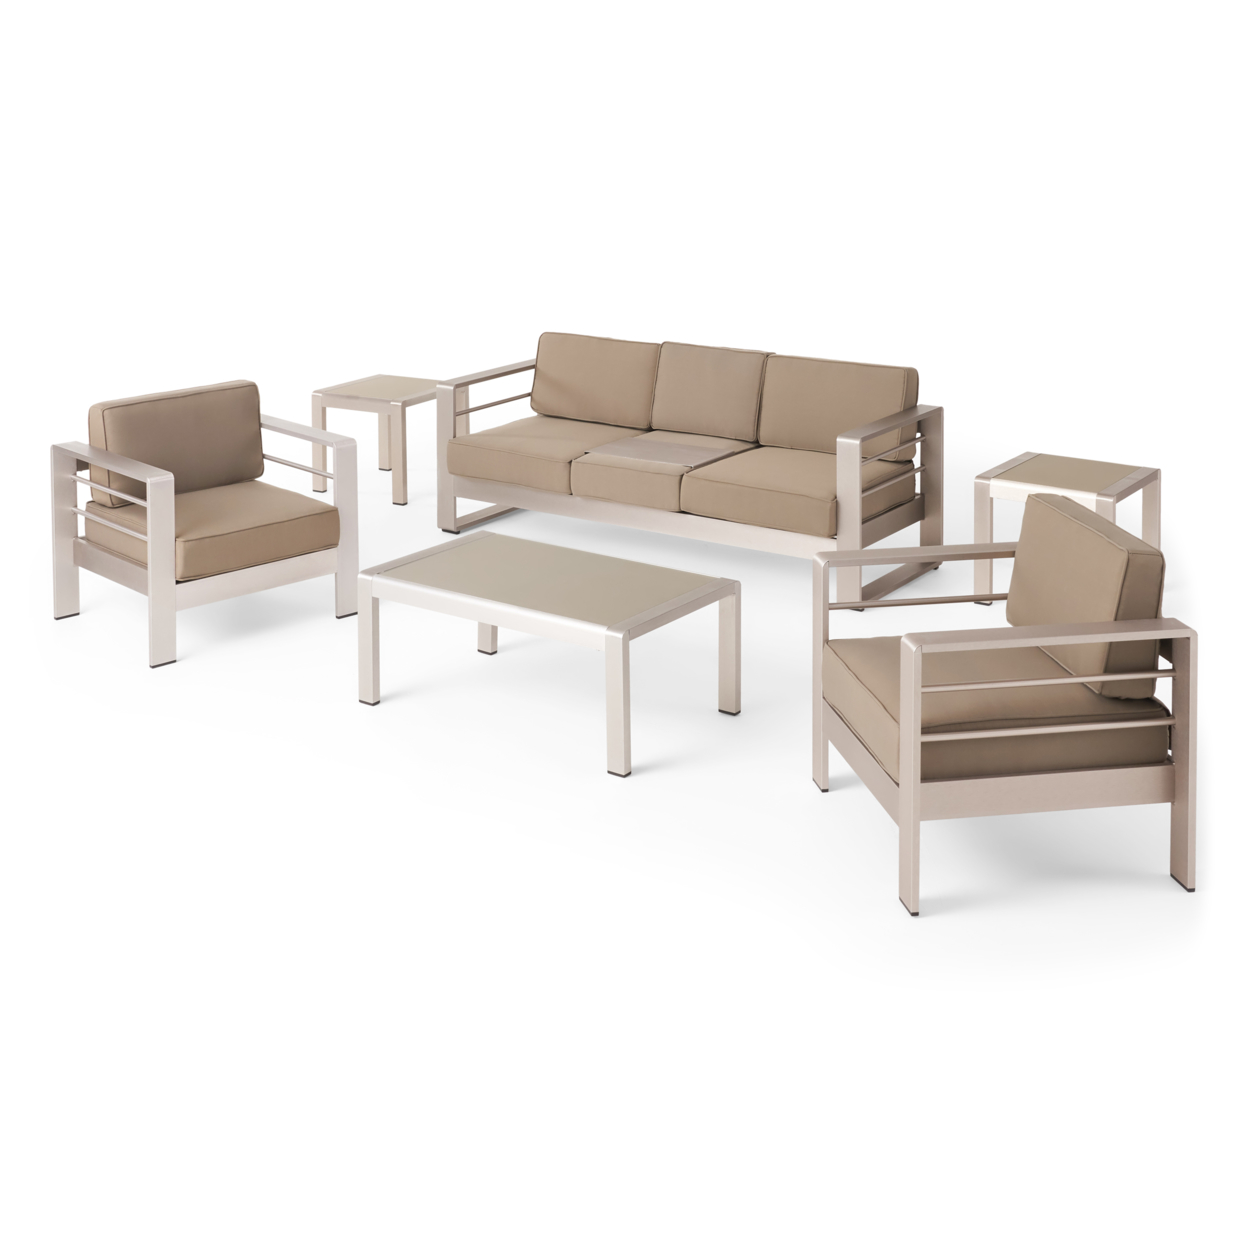 Cherie Outdoor 5 Seater Aluminum Sofa Chat Set With 2 Side Tables - Silver, Khaki